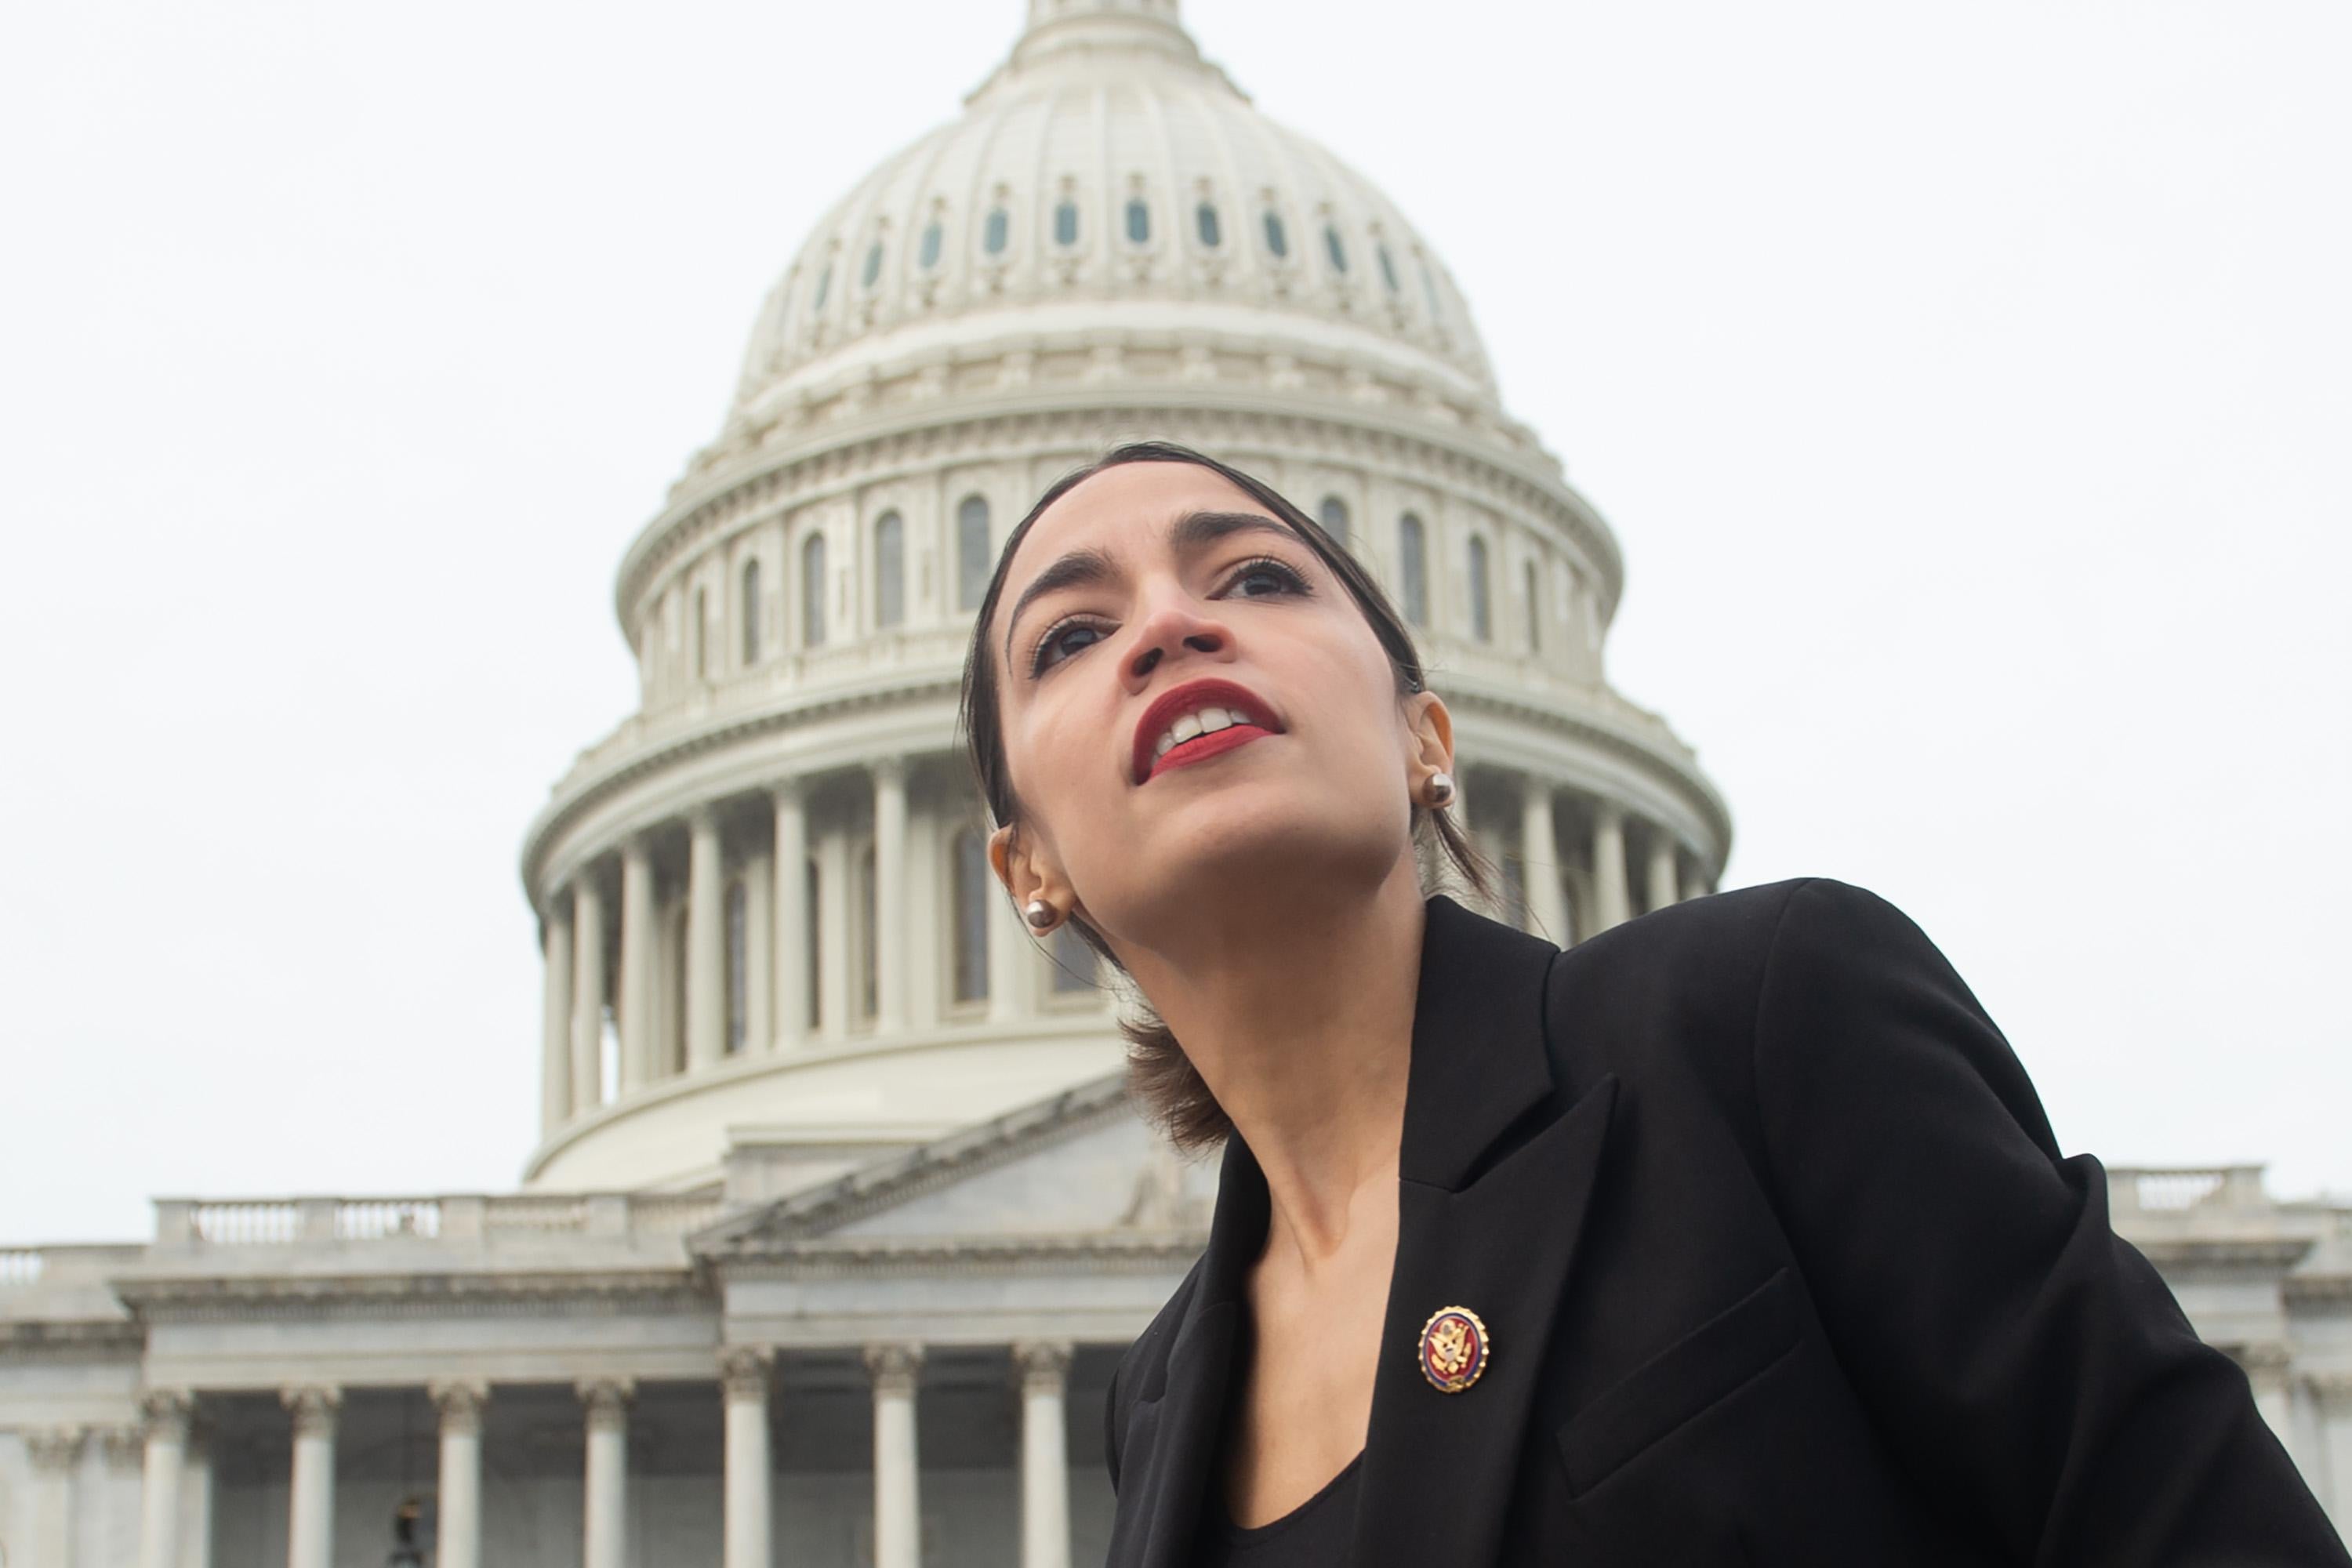 Rep. Alexandria Ocasio-Cortez, Democrat of New York, leaves a photo opportunity with the female Democratic members of the 116th US House of Representatives outside the U.S. Capitol in Washington, D.C. on January 4, 2019. 